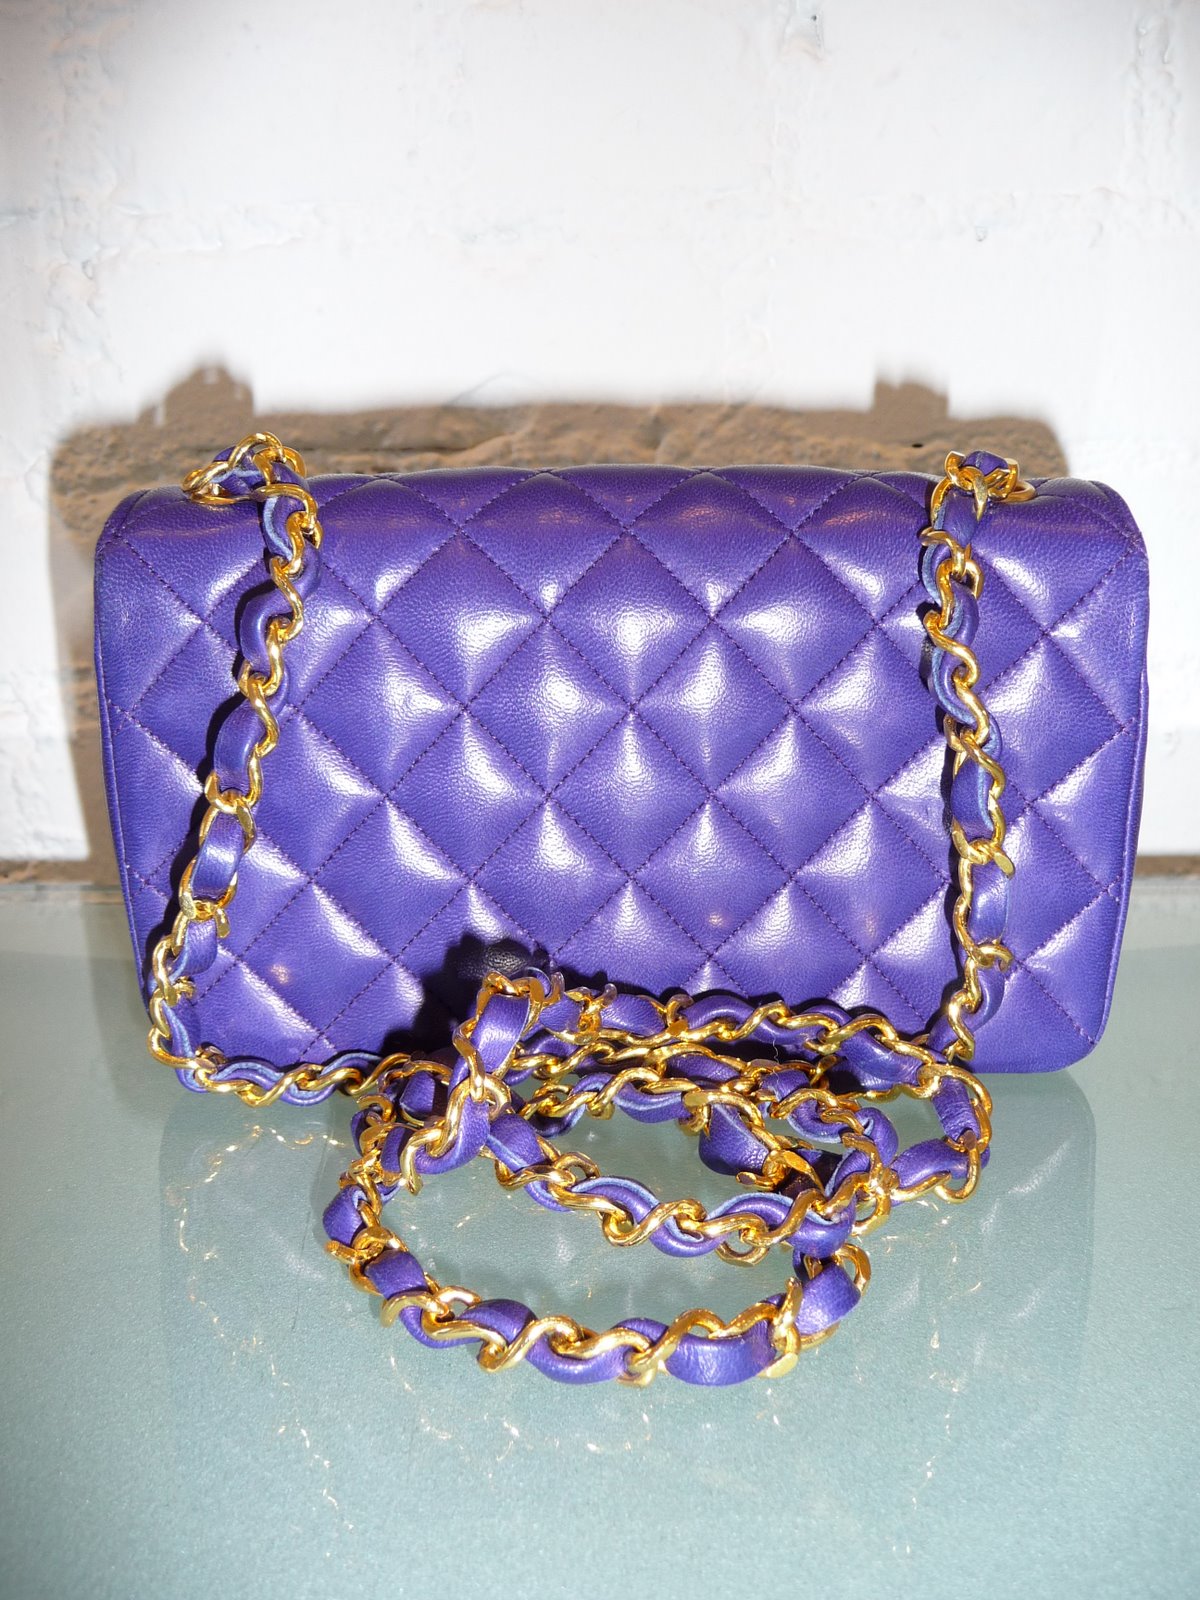 [chanel+classic+purple+quilted+leather+bag+c+1980s.jpg+(1).JPG]